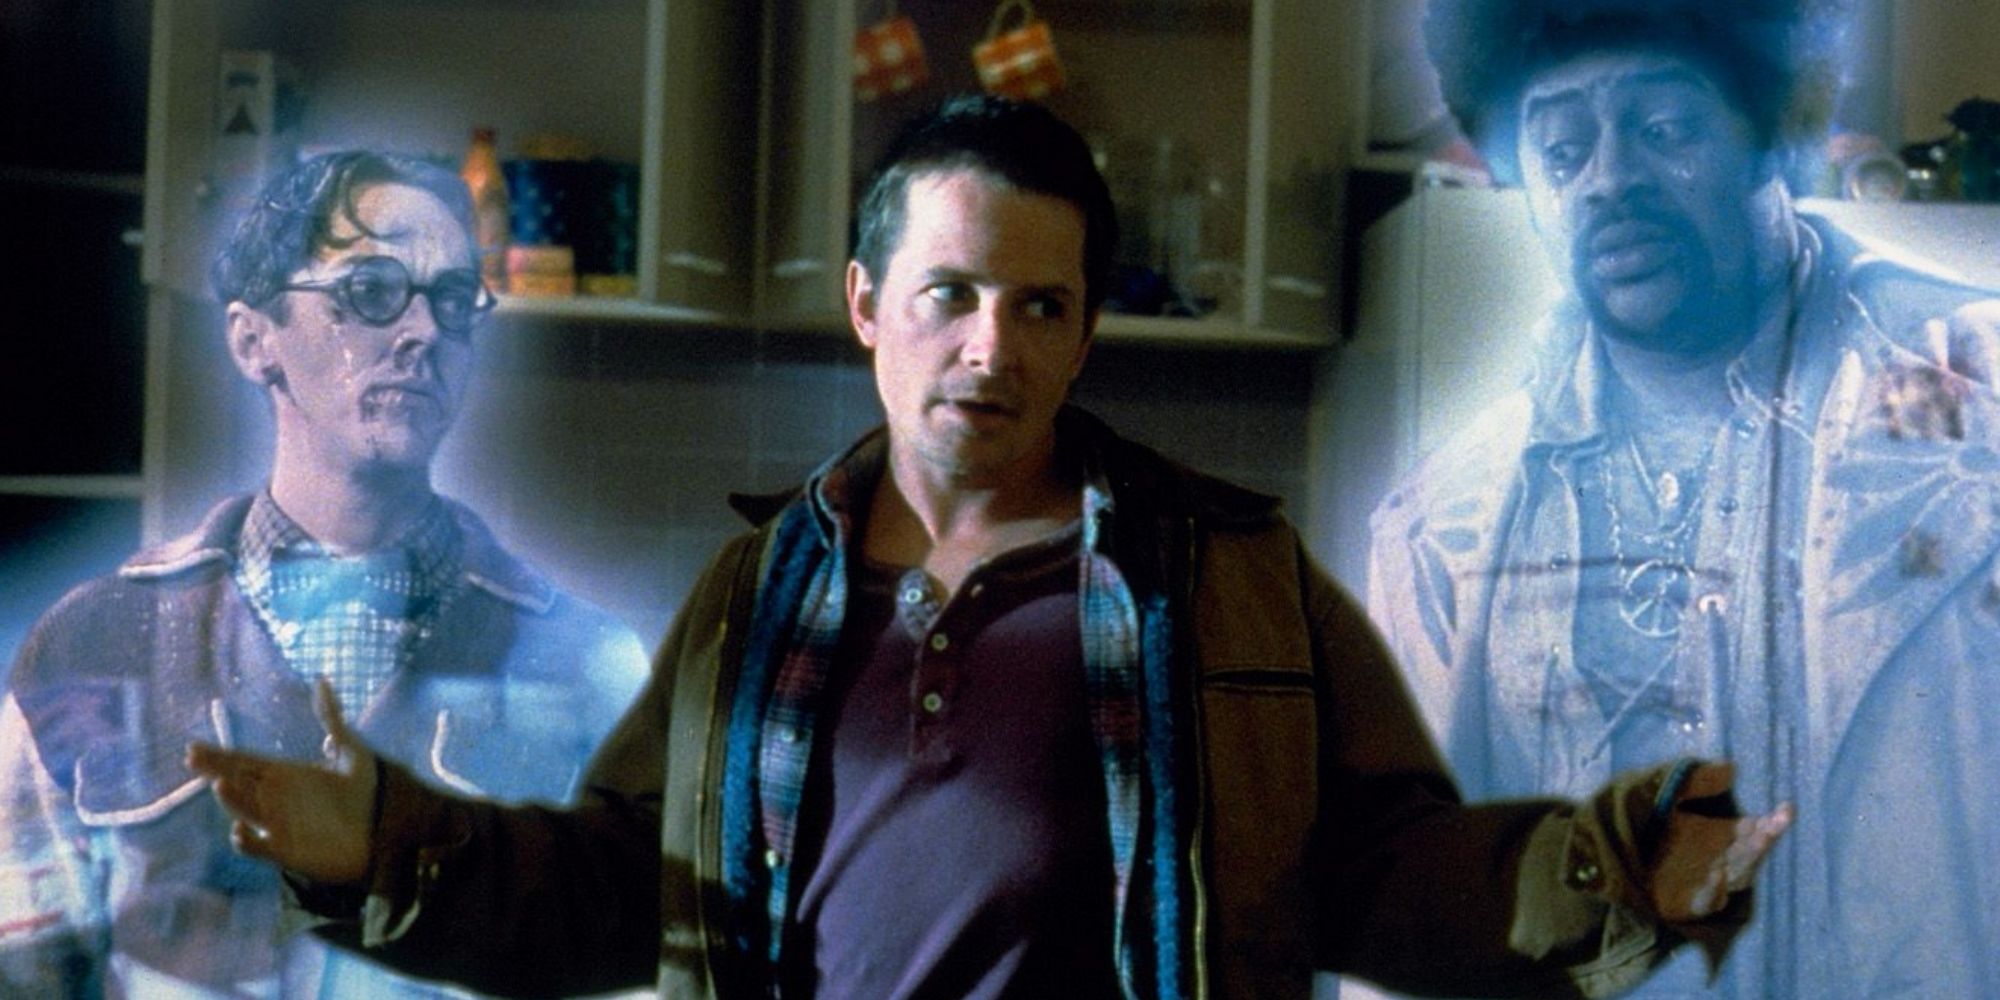 Frank with the ghosts of Stuart and Cyrus in 'The Frighteners' 